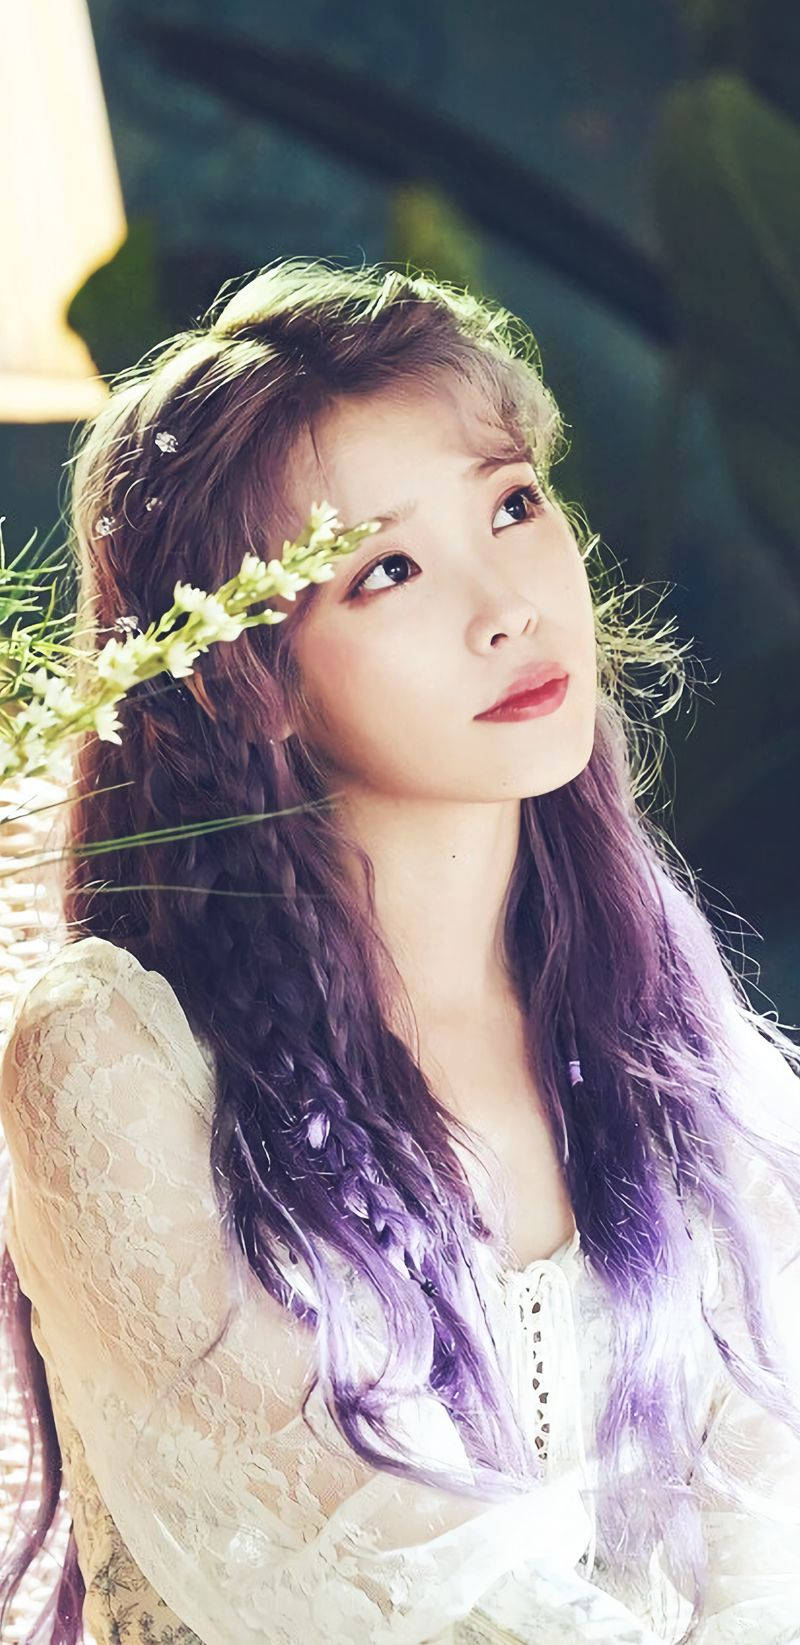 Iulila Flätat Hår (as A Suggestion For A Computer Or Mobile Wallpaper Featuring The Musician Iu With Purple Braided Hair) Wallpaper